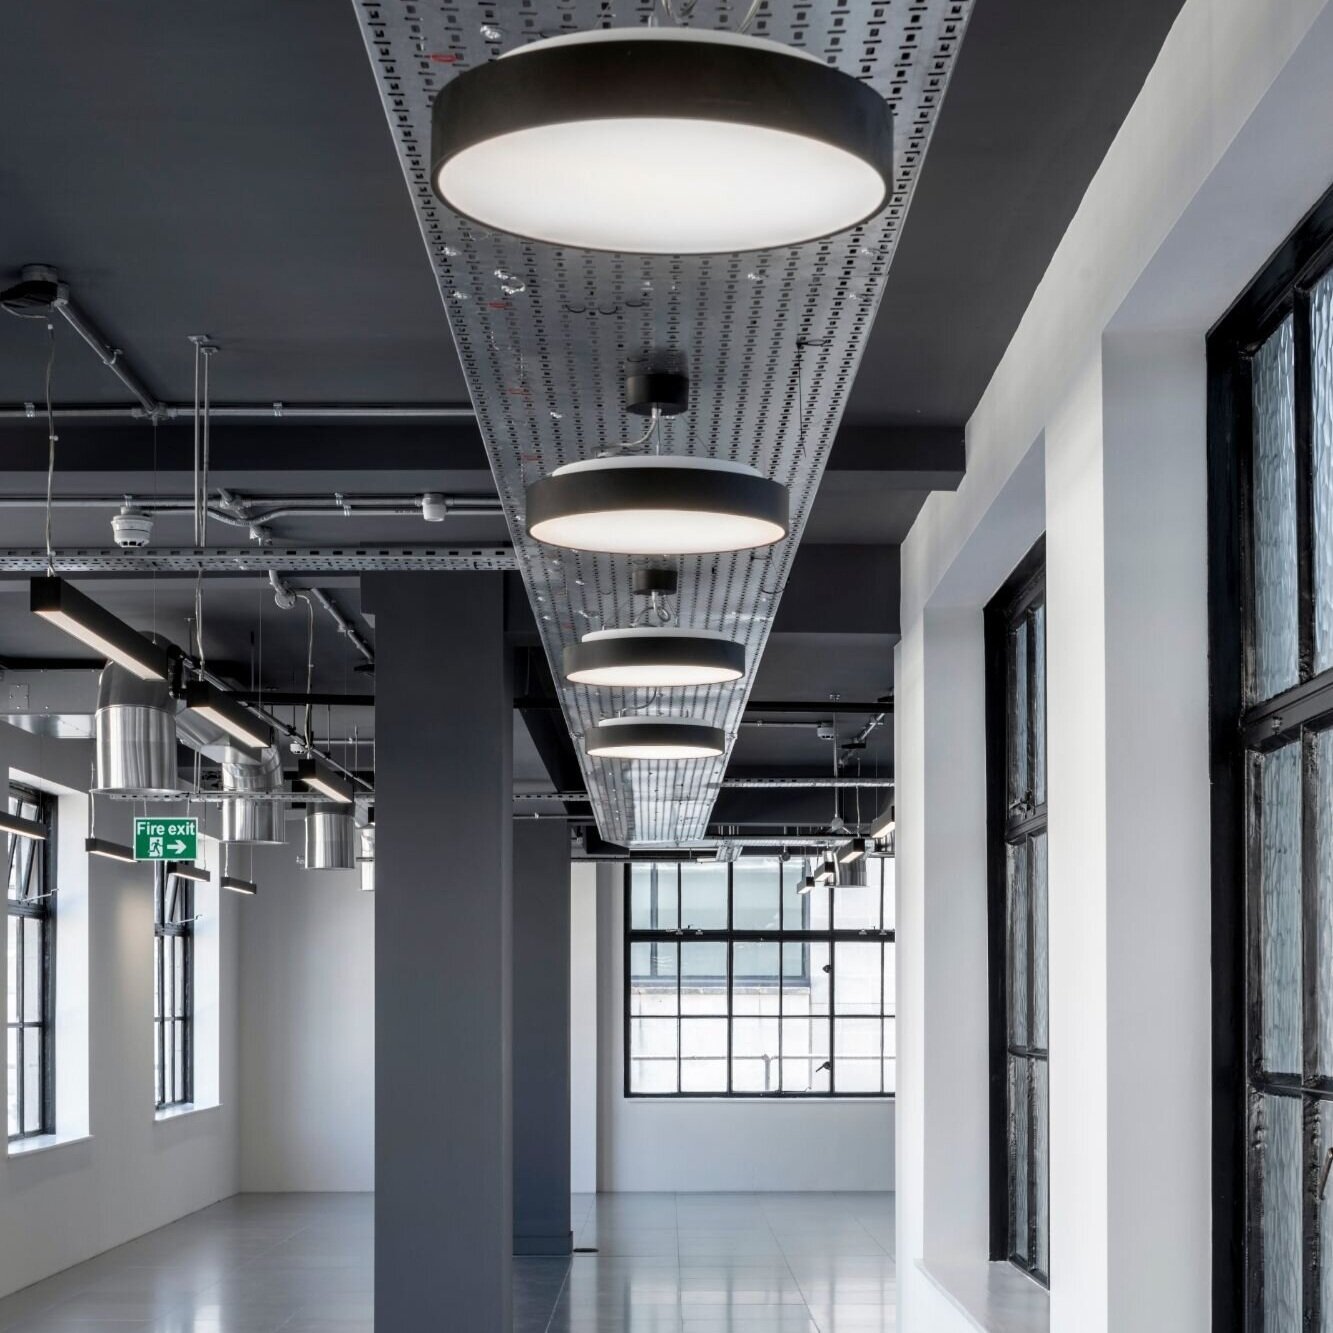 Office lighting for an industrial style CAT A fitout at 11 Old Jewry, London.